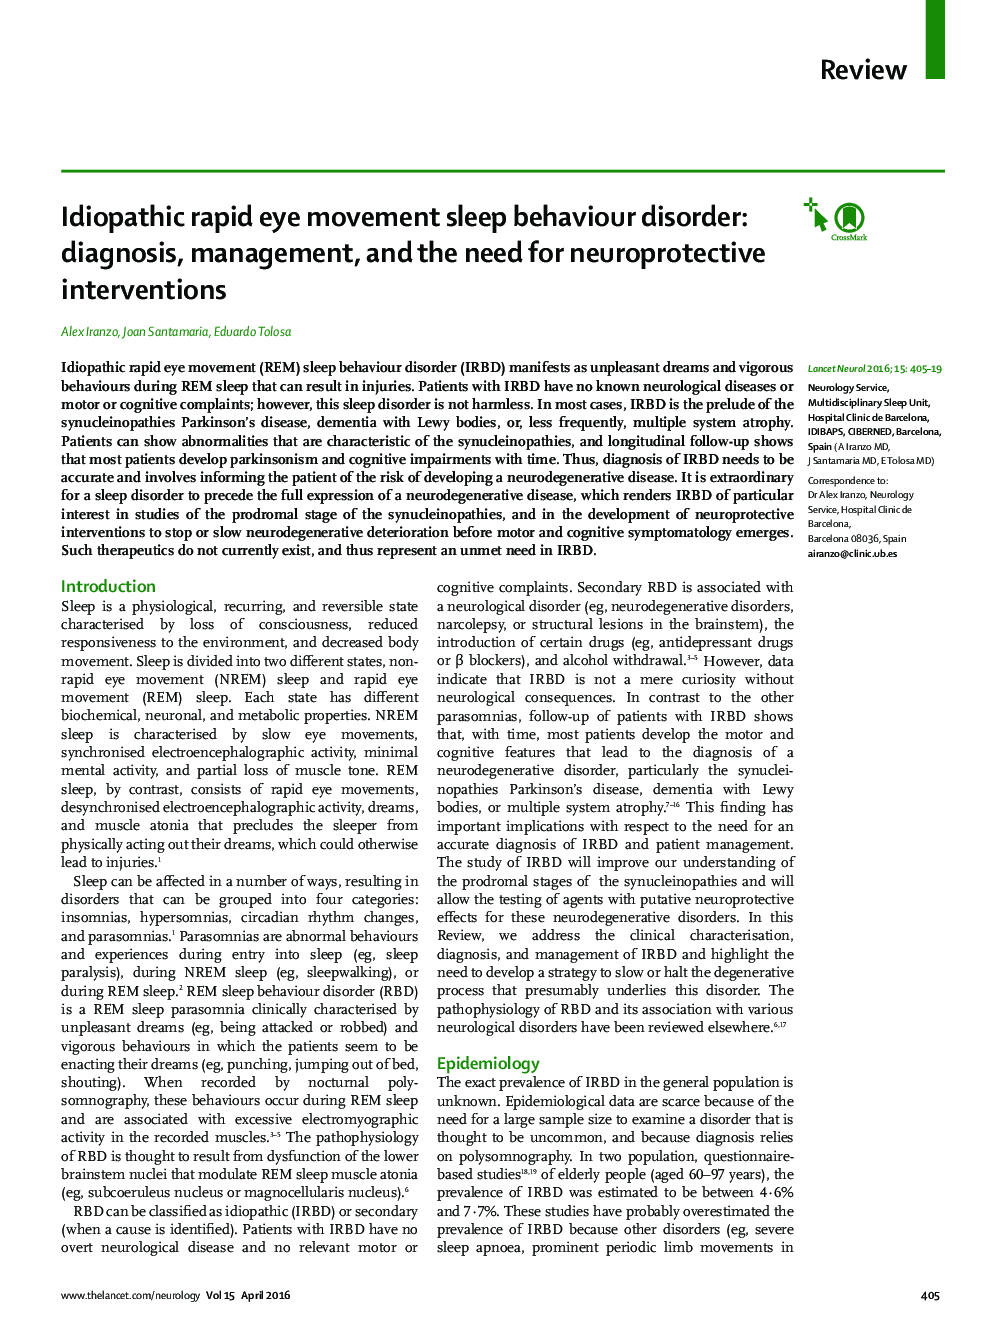 Idiopathic rapid eye movement sleep behaviour disorder: diagnosis, management, and the need for neuroprotective interventions